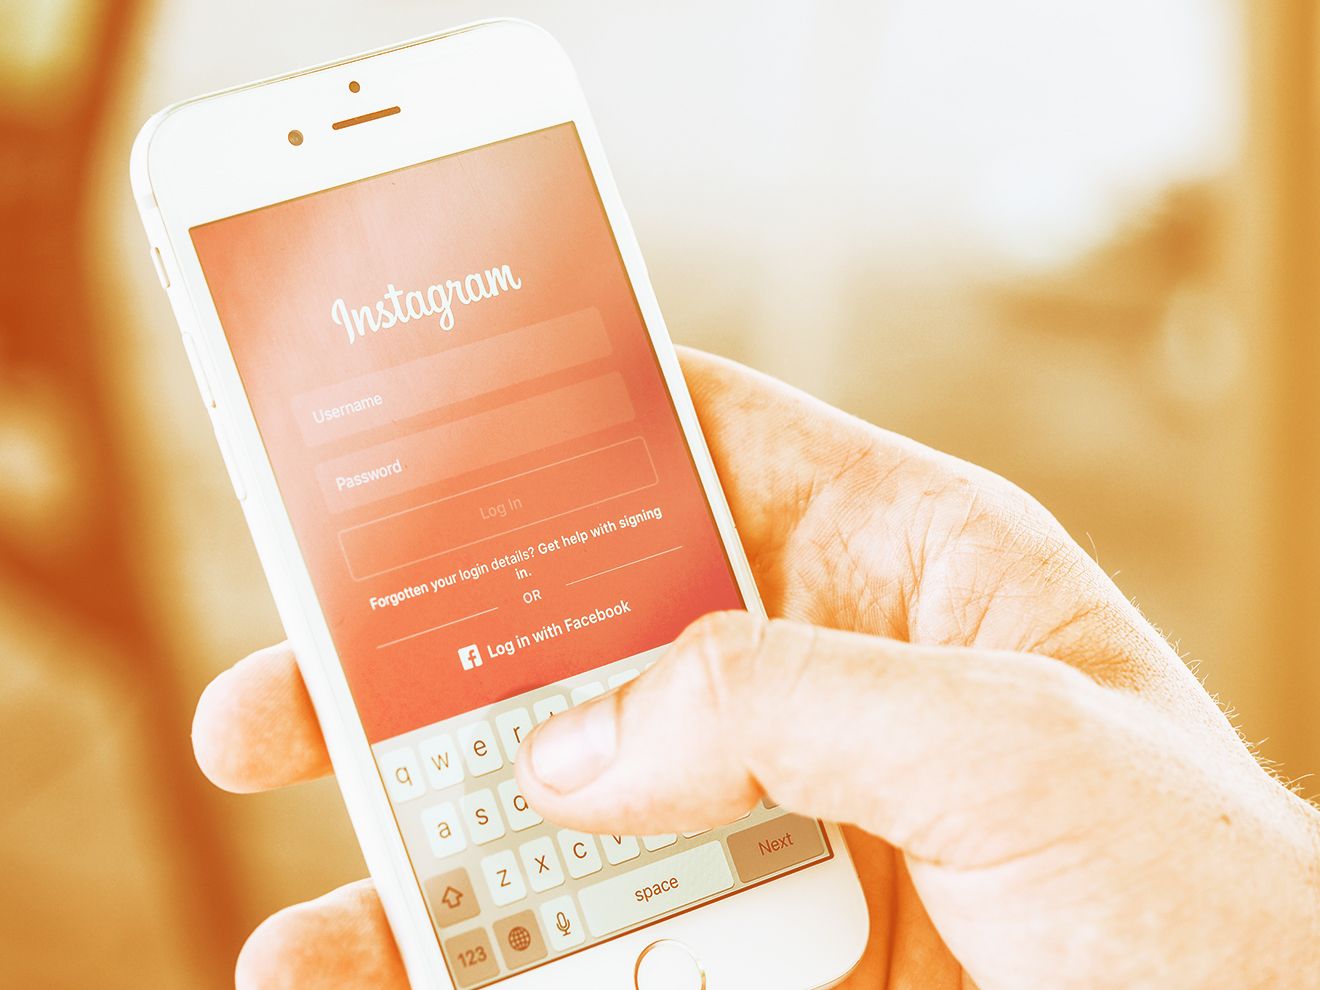 11 Instagram Accounts To Follow For Small Business Inspiration